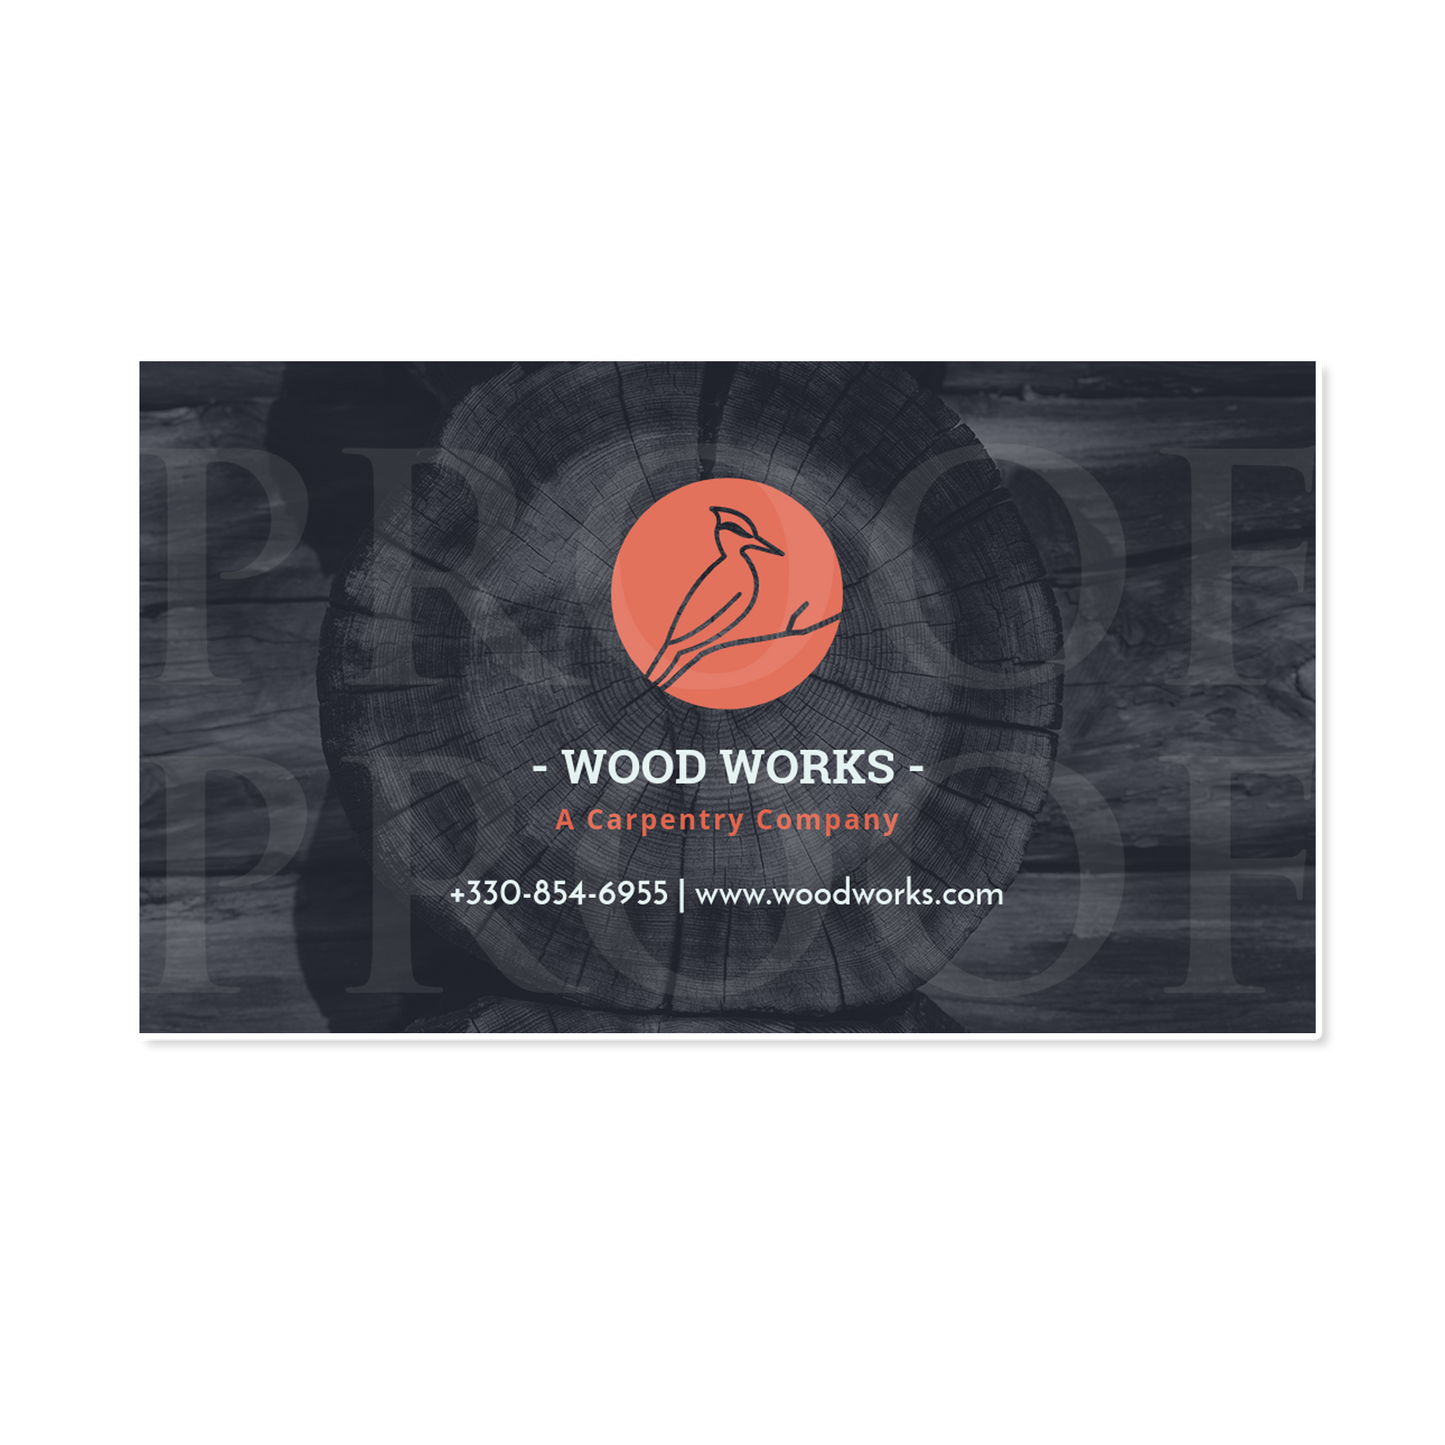 Wood Works Carpentry Business Cards - Wilson Design Group